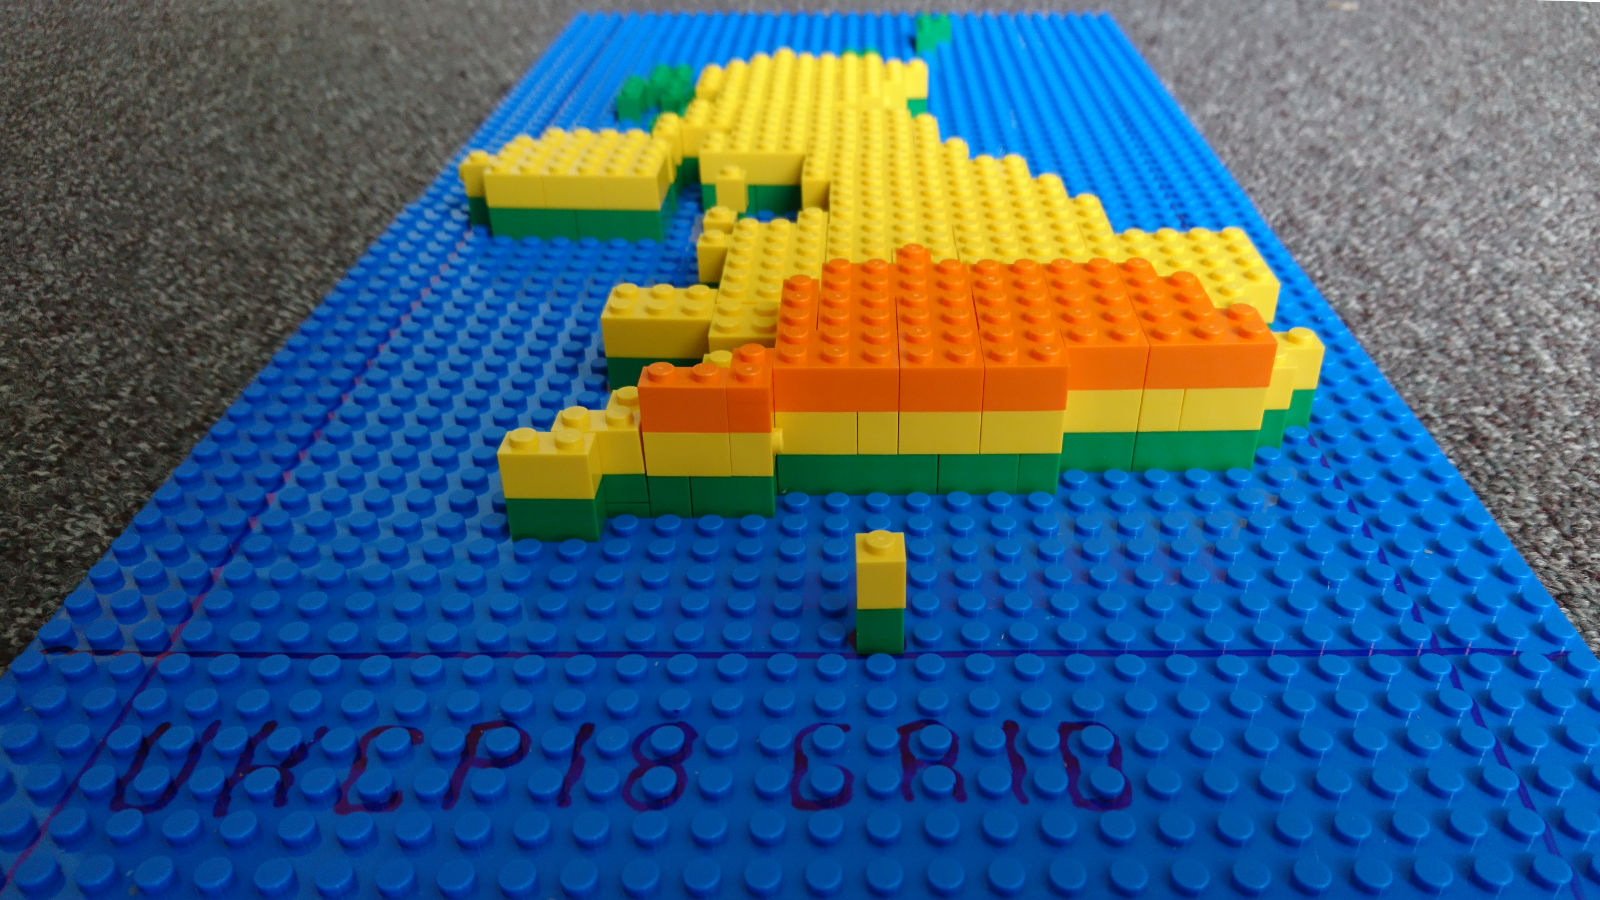 UK Climate Projections 2018 in Lego